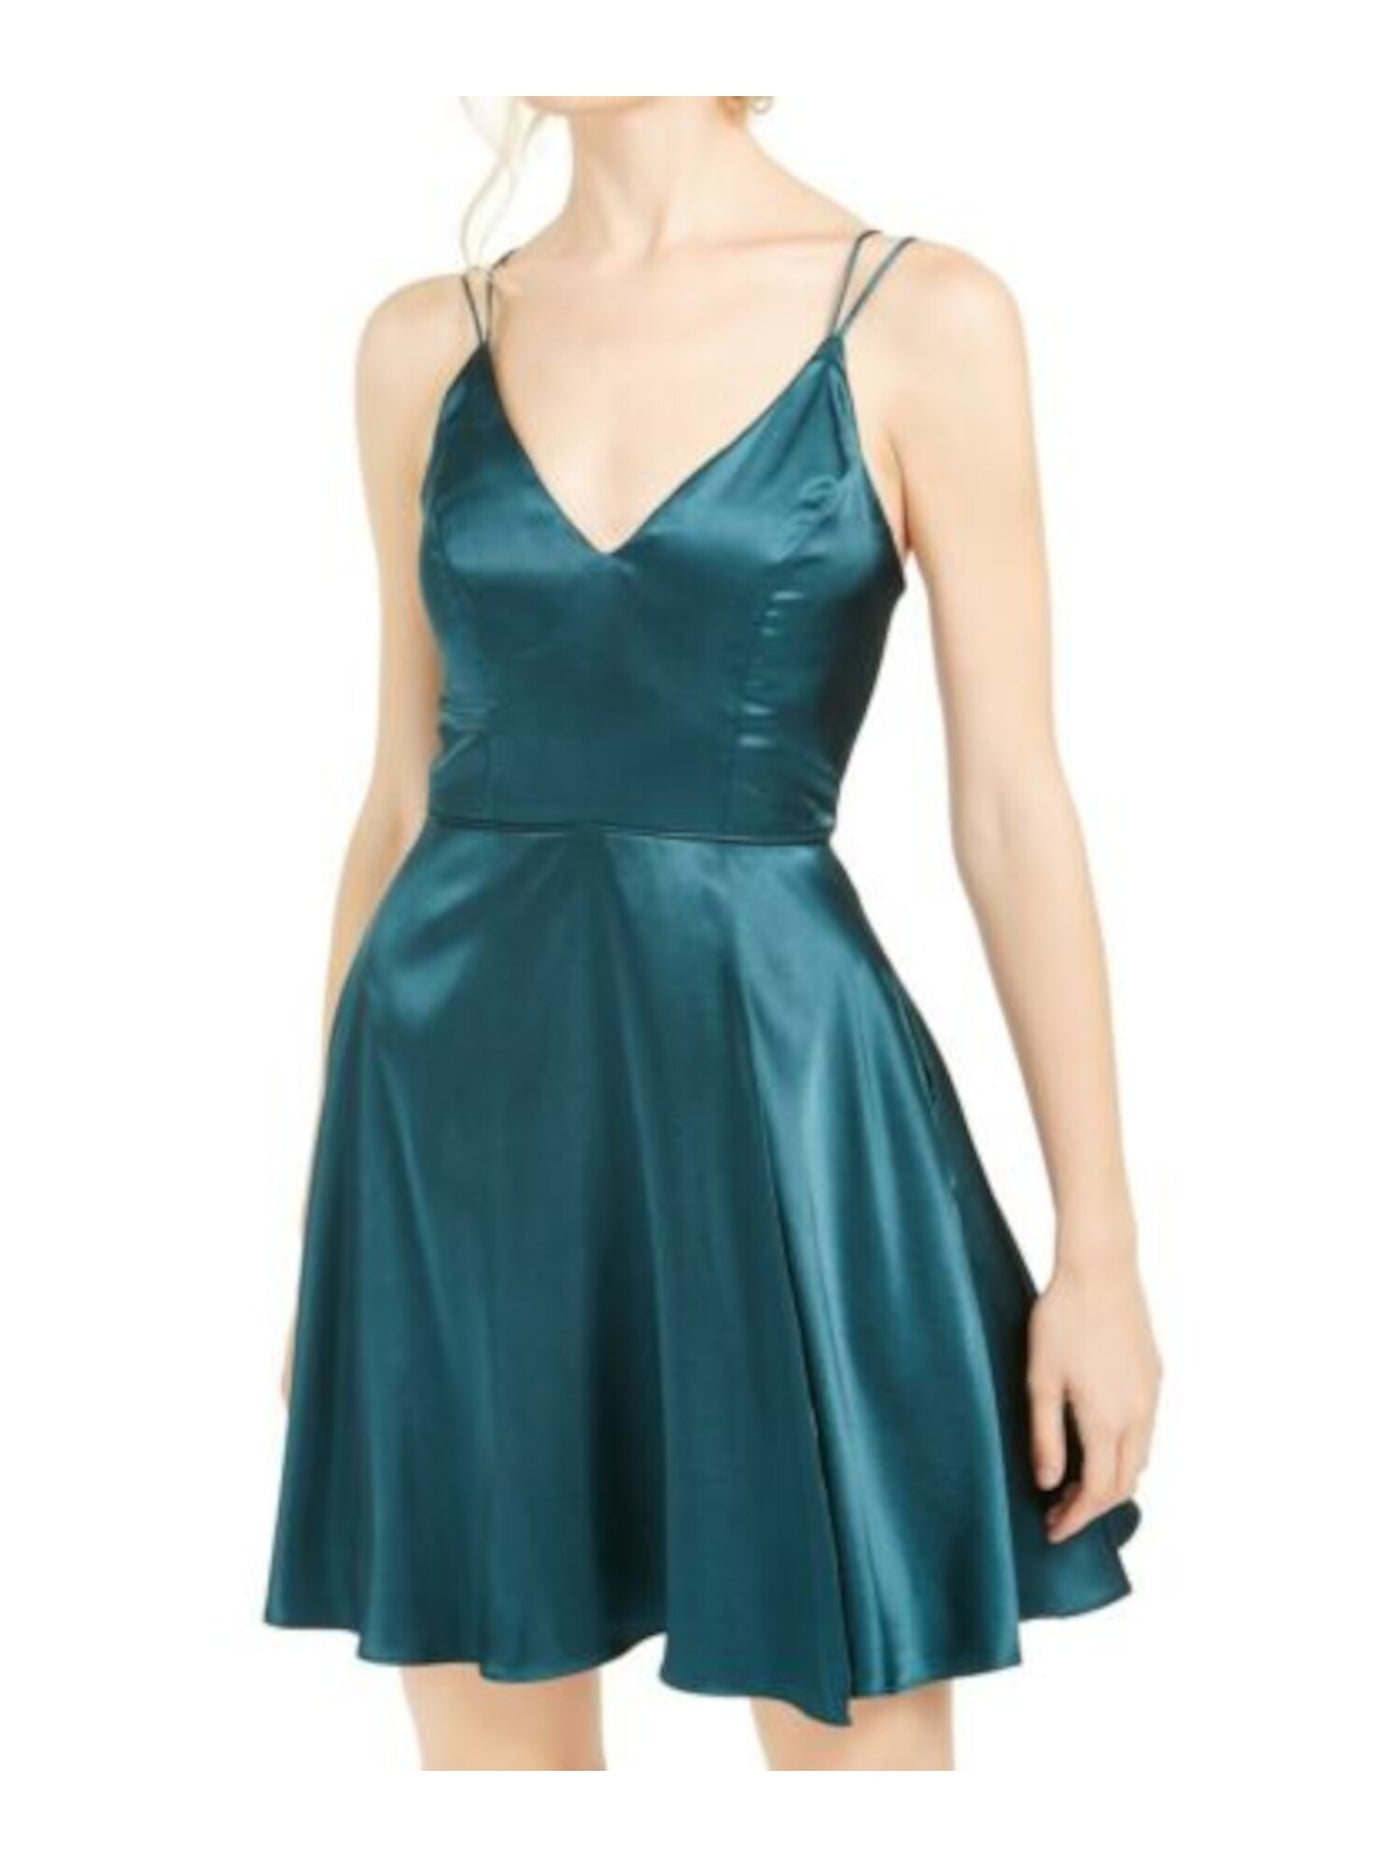 SEQUIN HEARTS Womens Green Pocketed Silk Spaghetti Strap Sweetheart Neckline Short Party Fit + Flare Dress Juniors 1